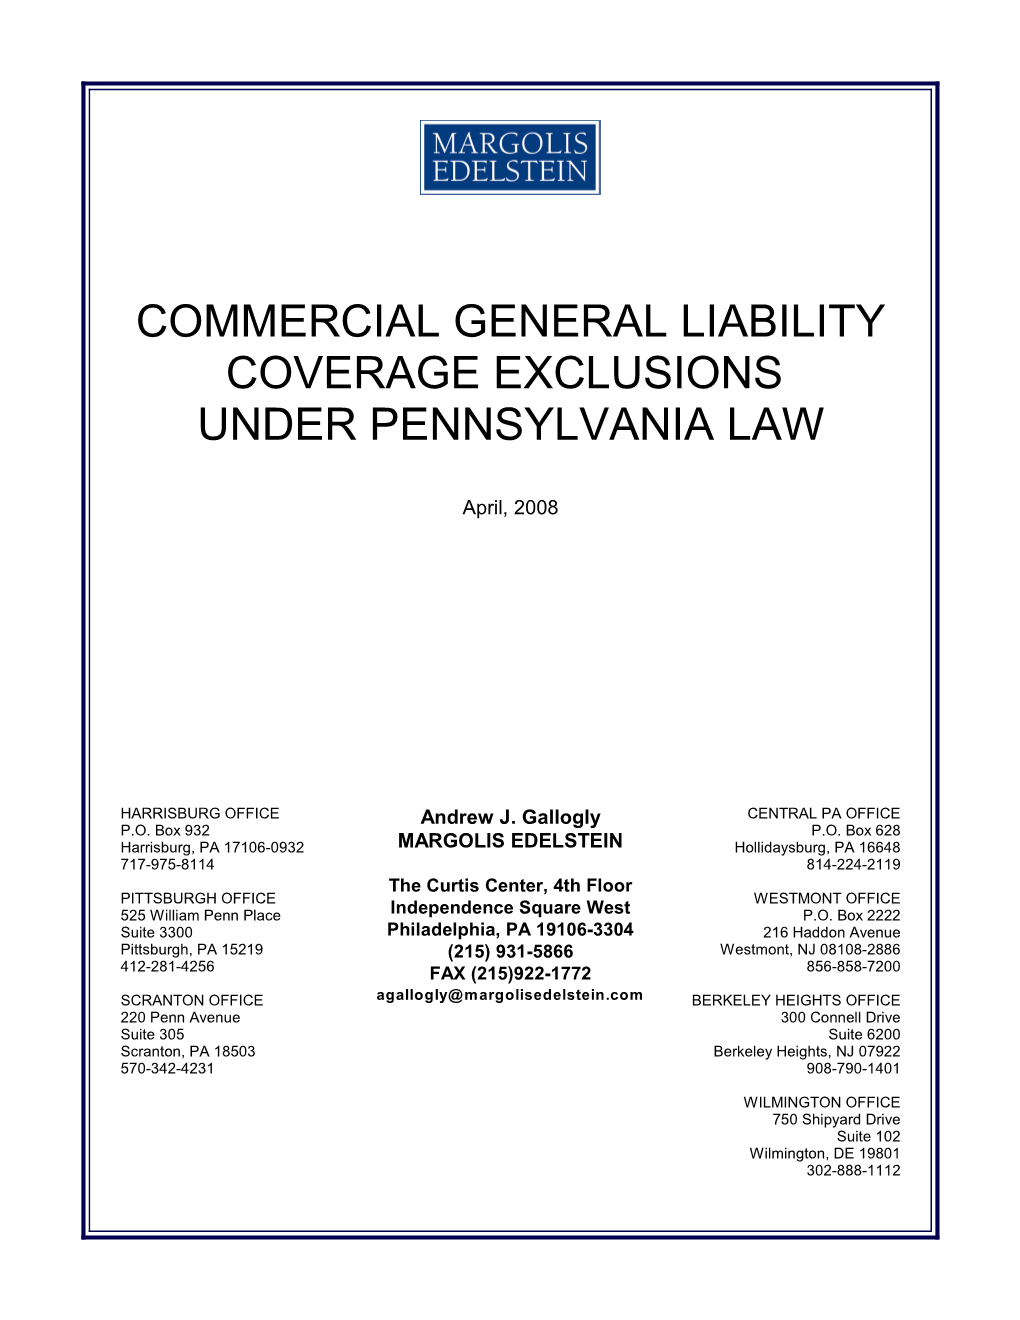 Commercial General Liability Coverage Exclusions Under Pennsylvania Law